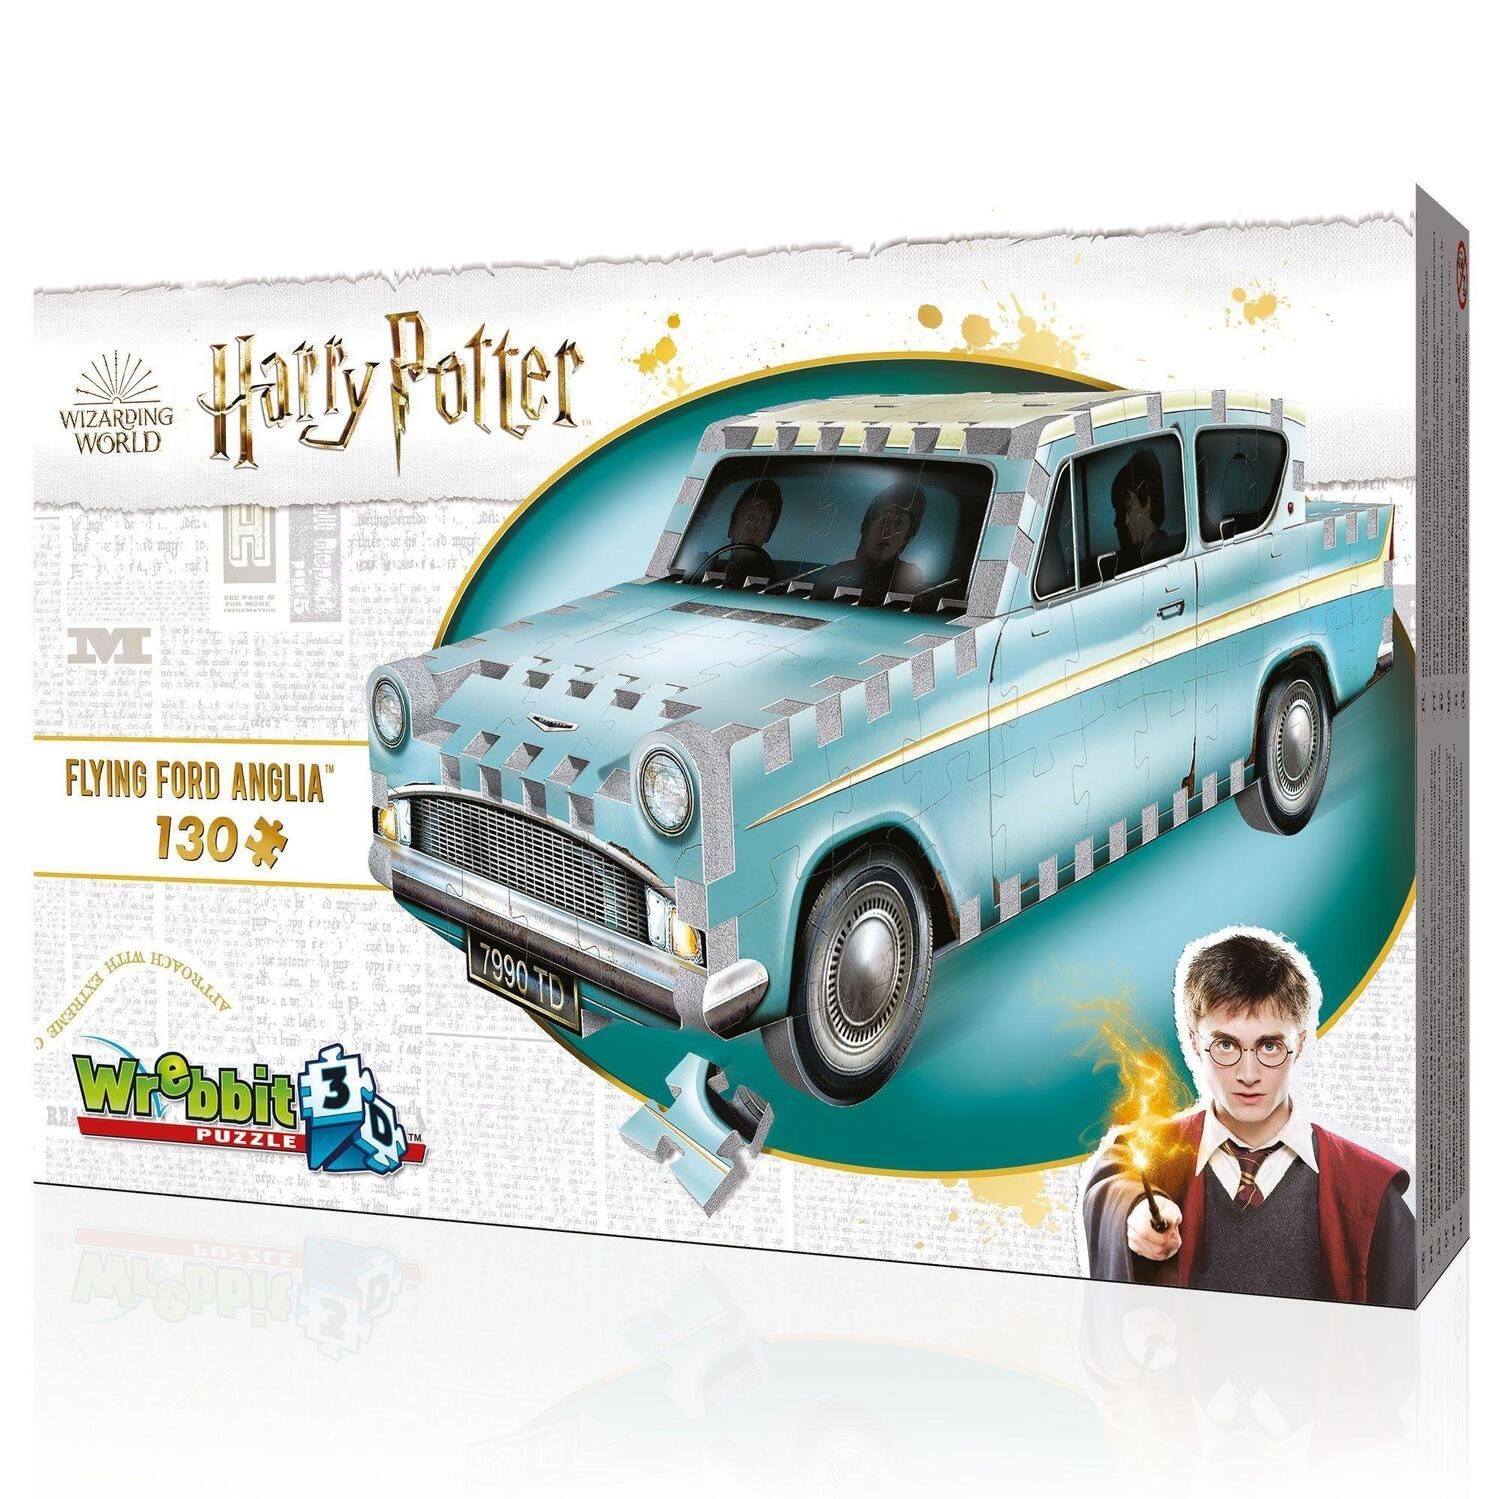 Teile), 130 Harry Potter. (130 JH-Products Puzzleteile Anglia 3D-PUZZLE Flying Ford Puzzle